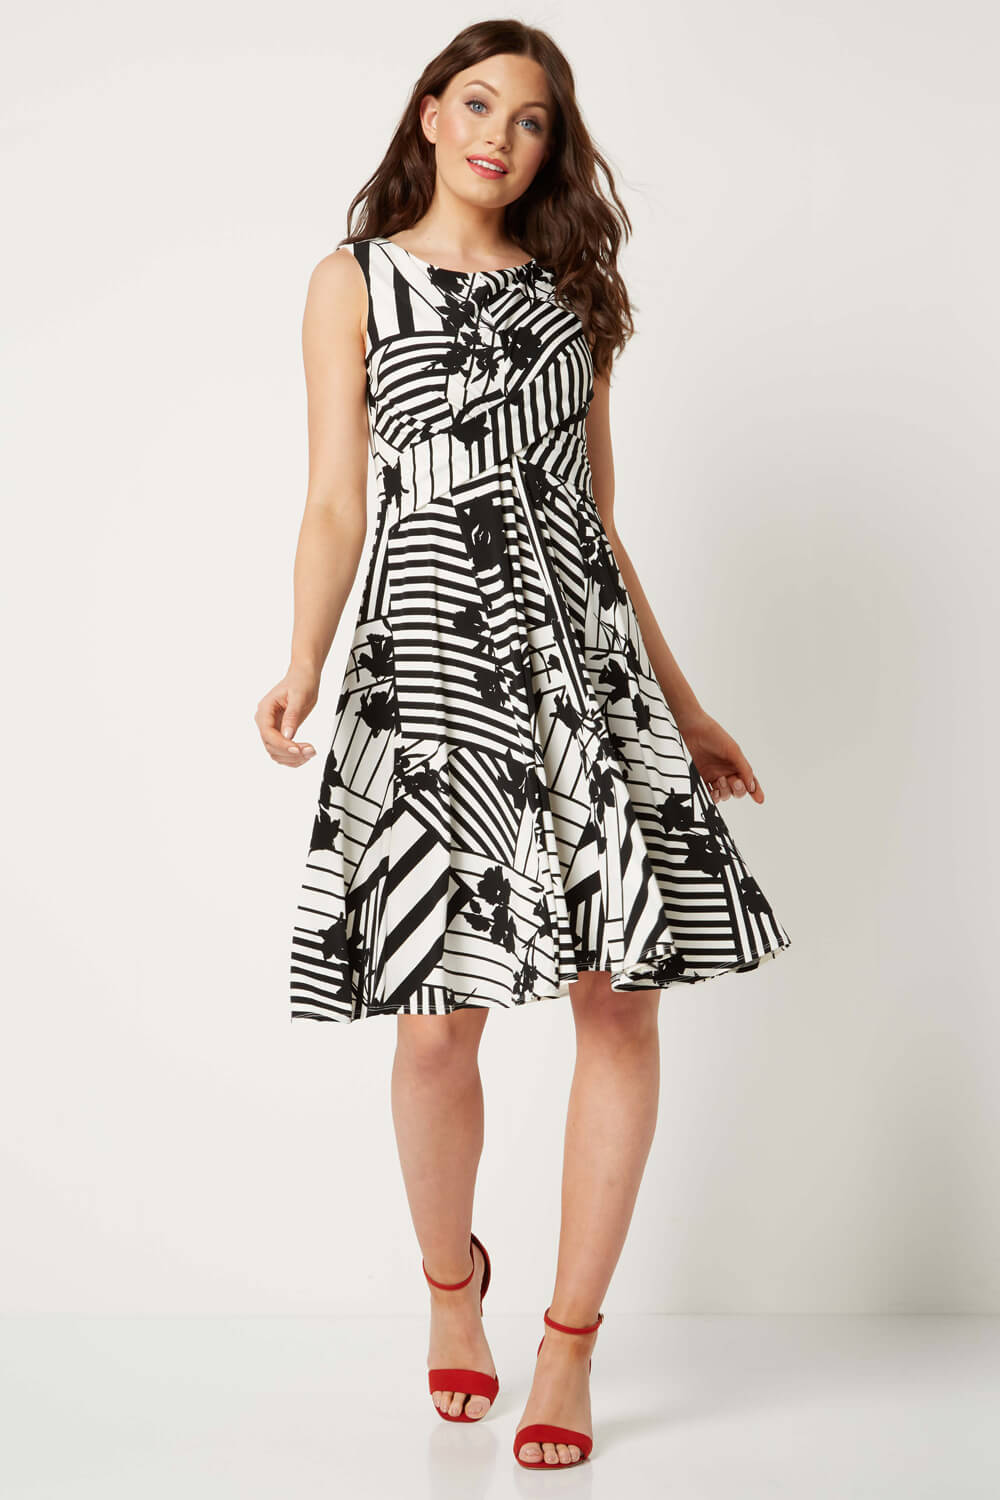 Monochrome Print Fit and Flare Dress